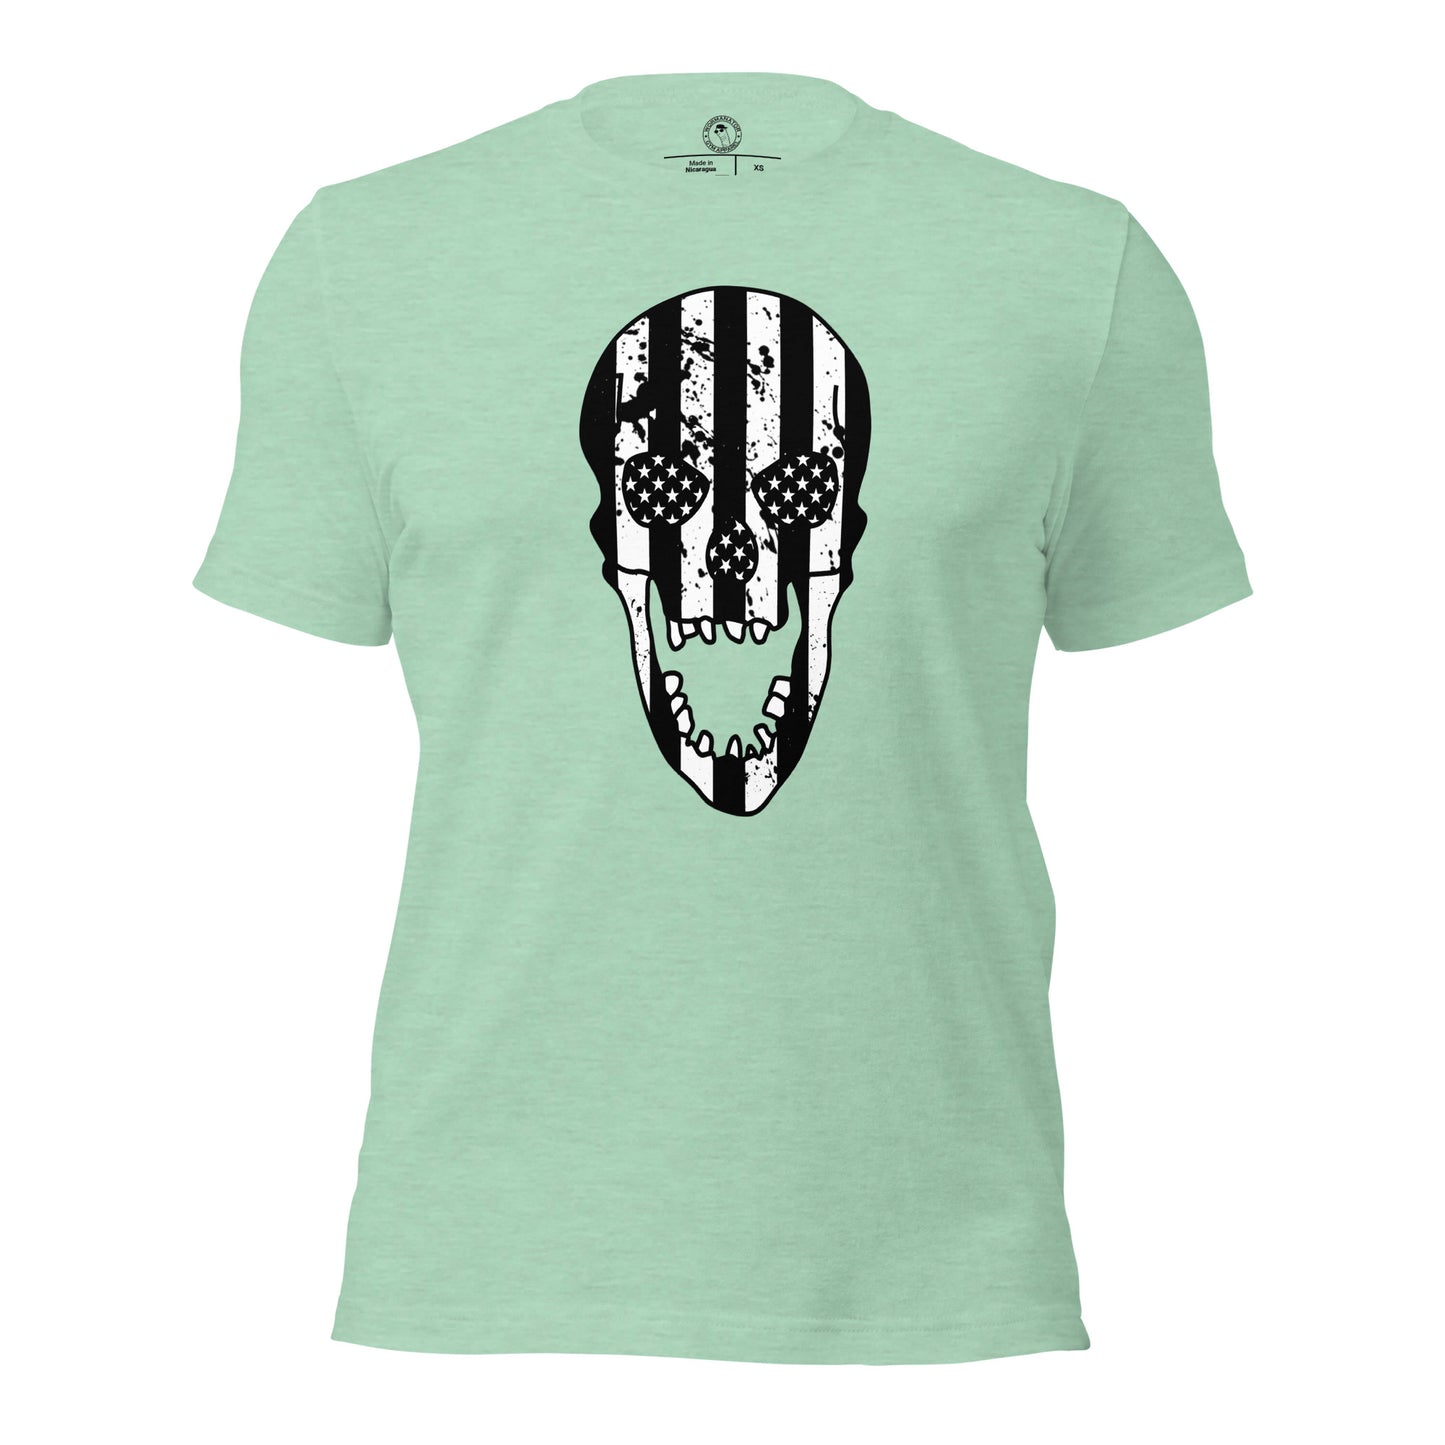 Blacked-Out USA Skull Shirt in Heather Prism Mint